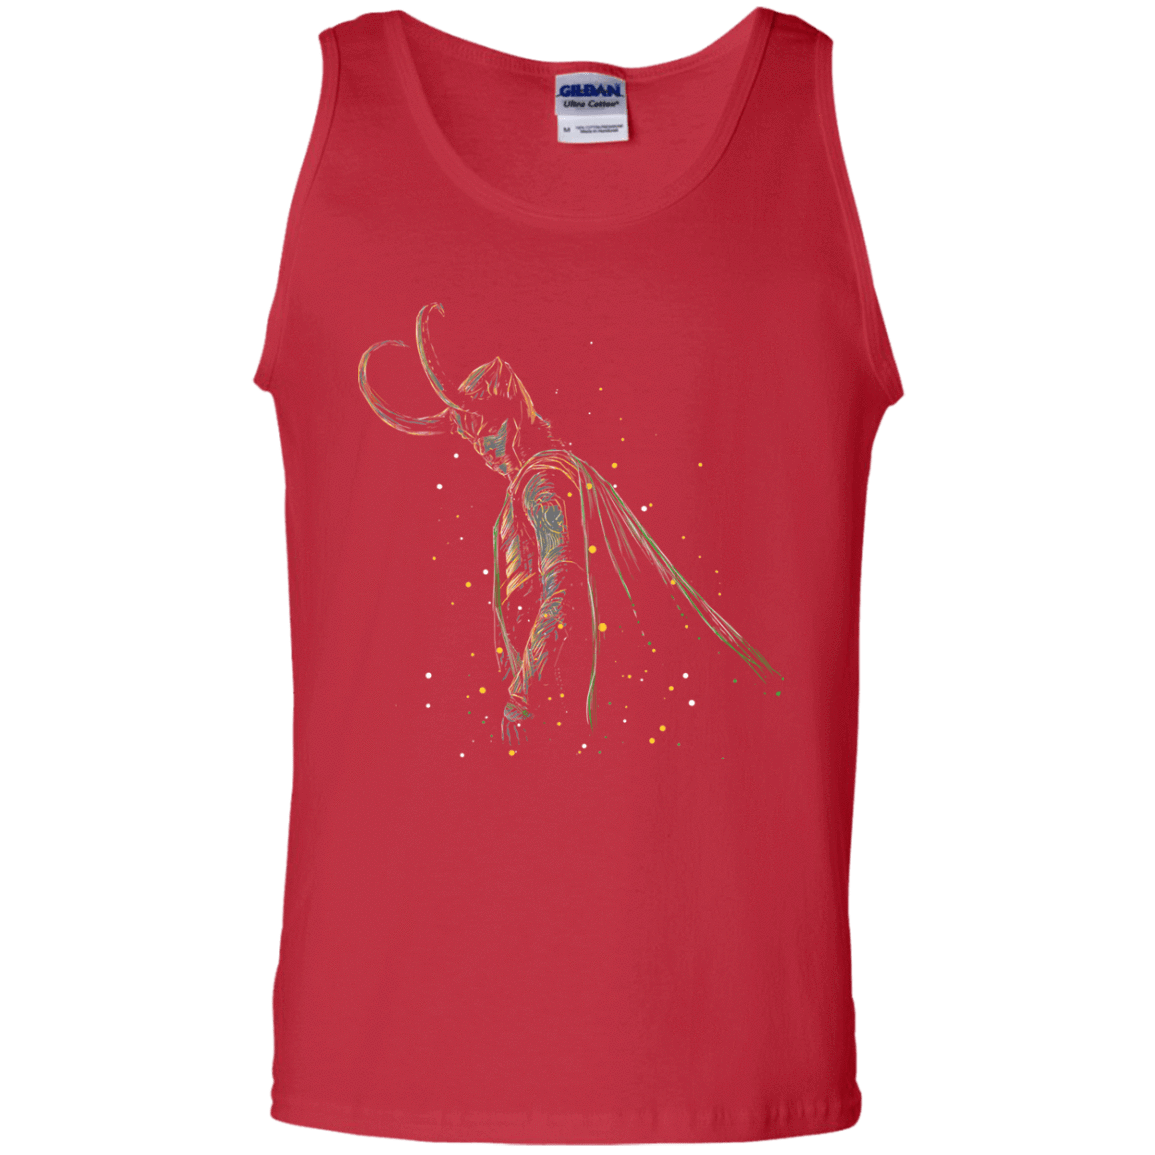 T-Shirts Red / S Master of Illusions Men's Tank Top